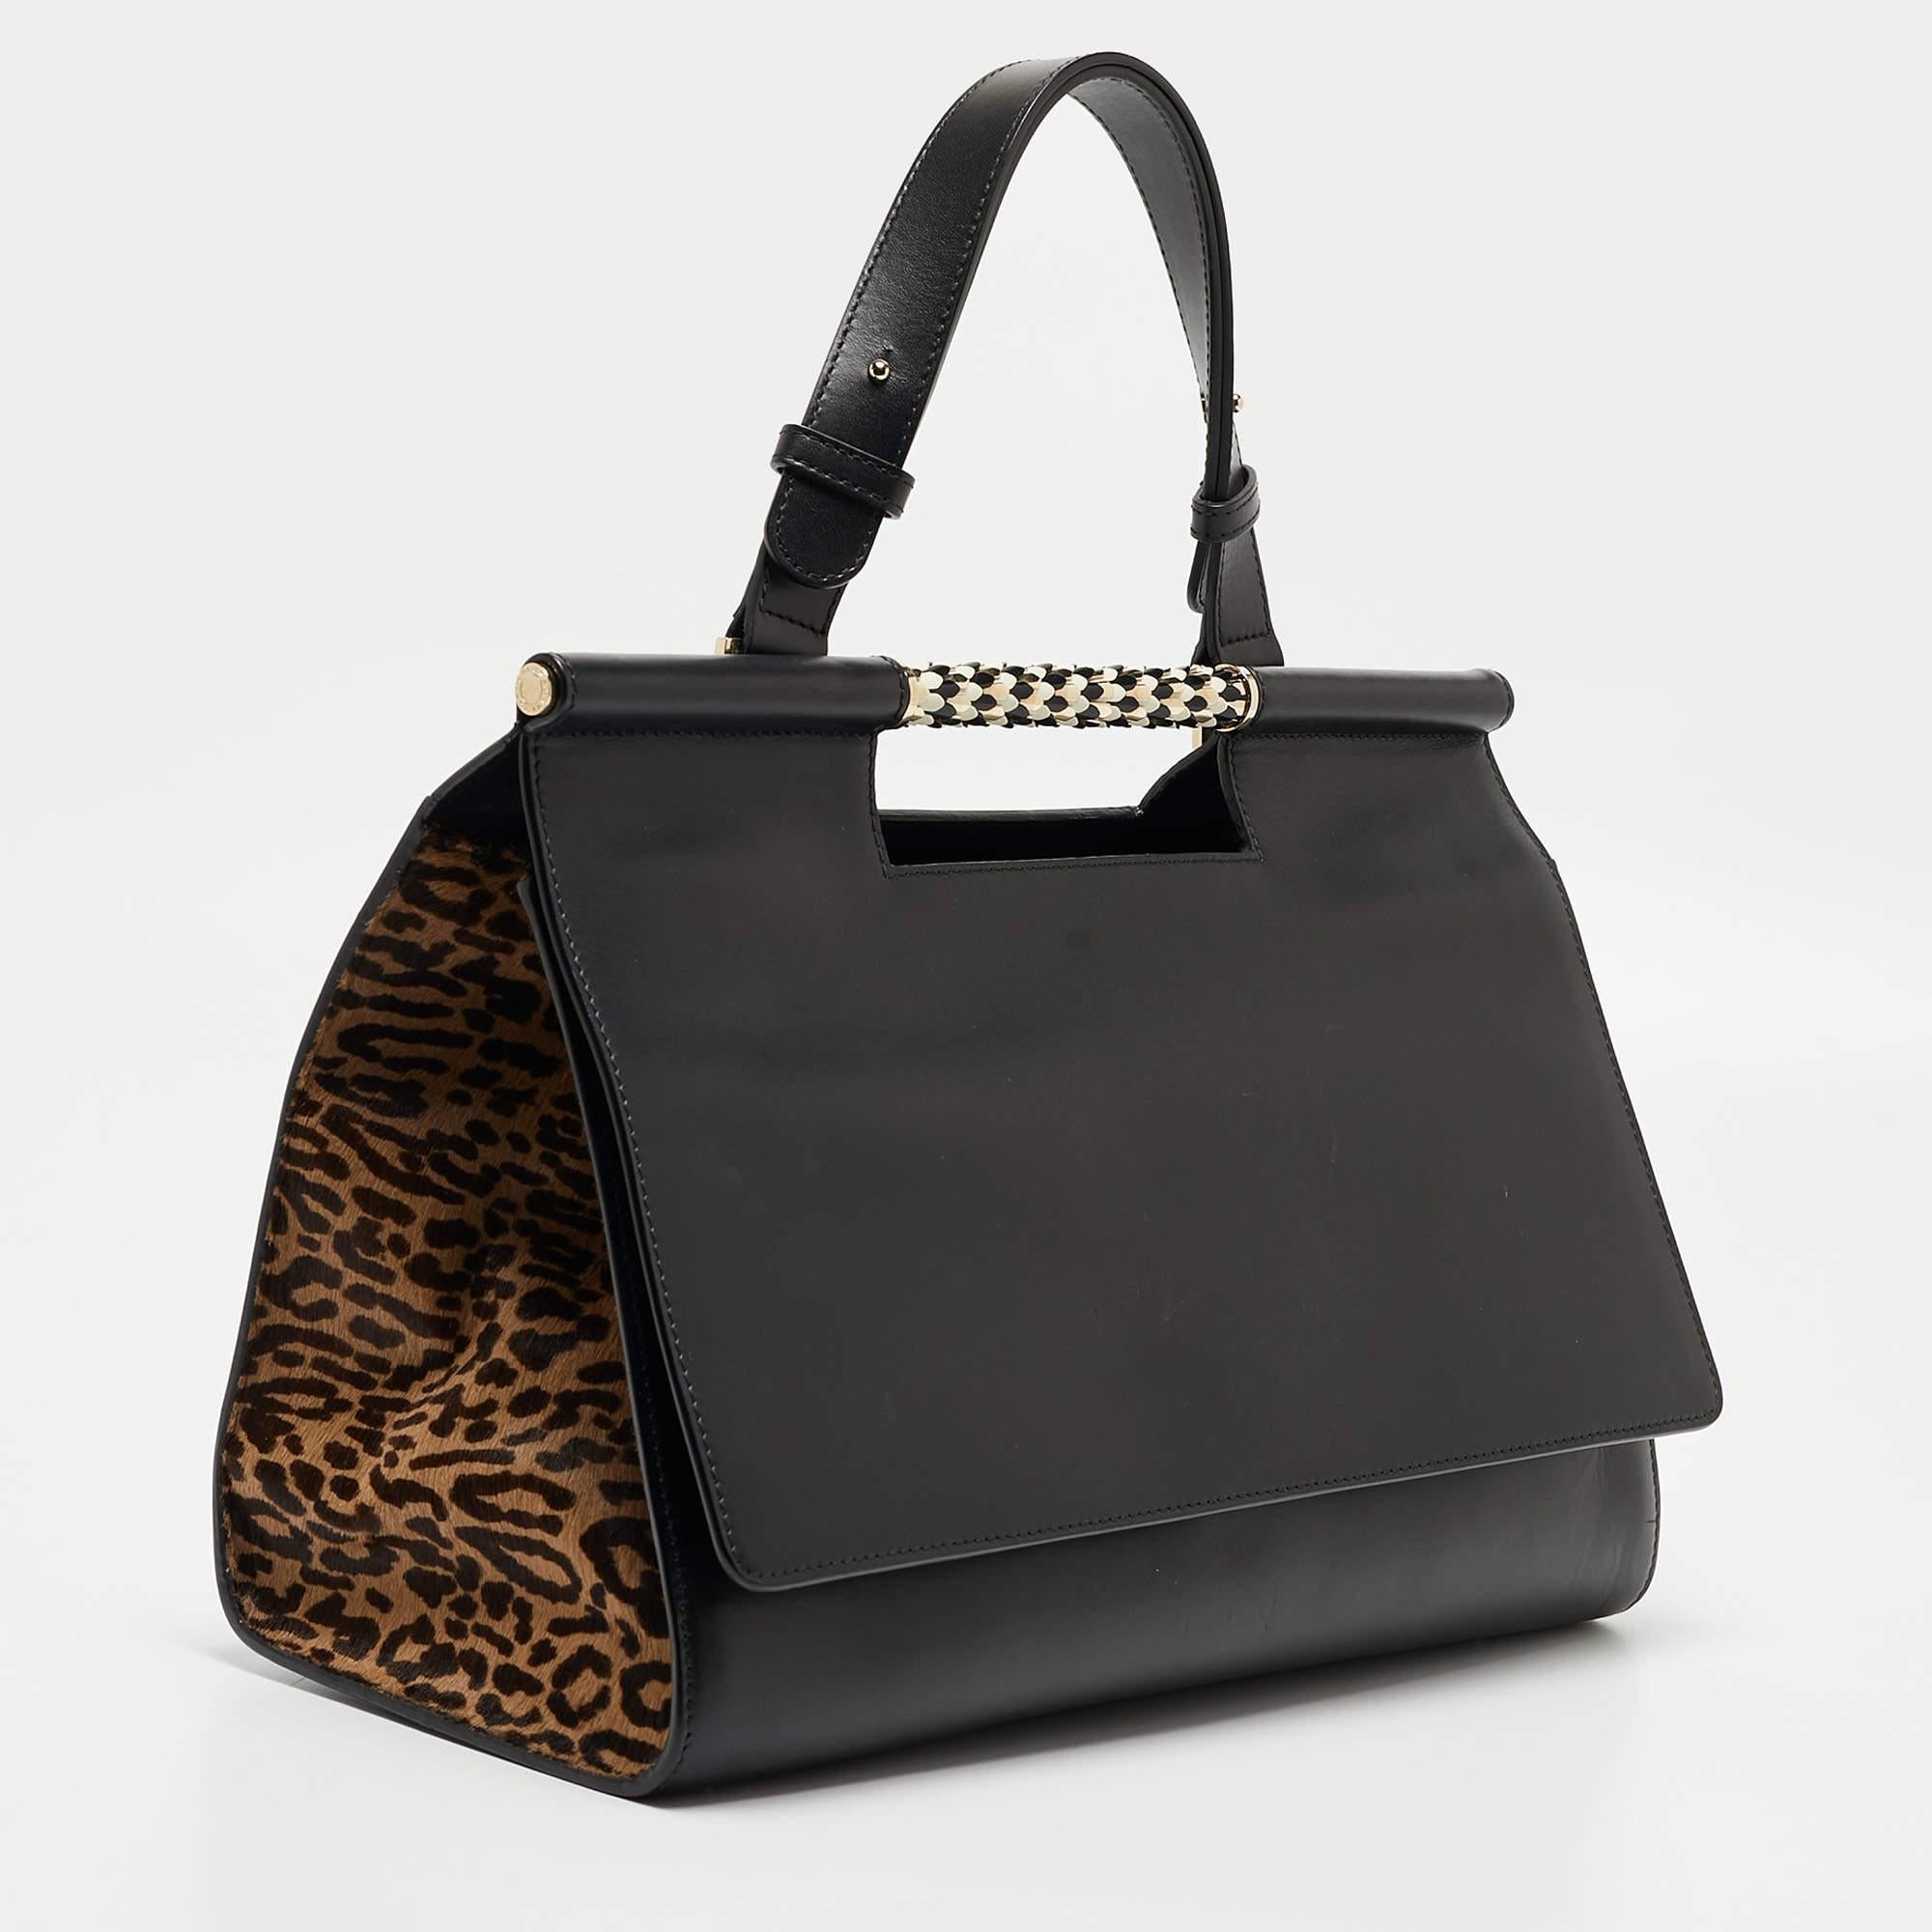 Bvlgari Black Leather and Leopard Print Calfhair Scaglie Serpenti Tote For Sale 2